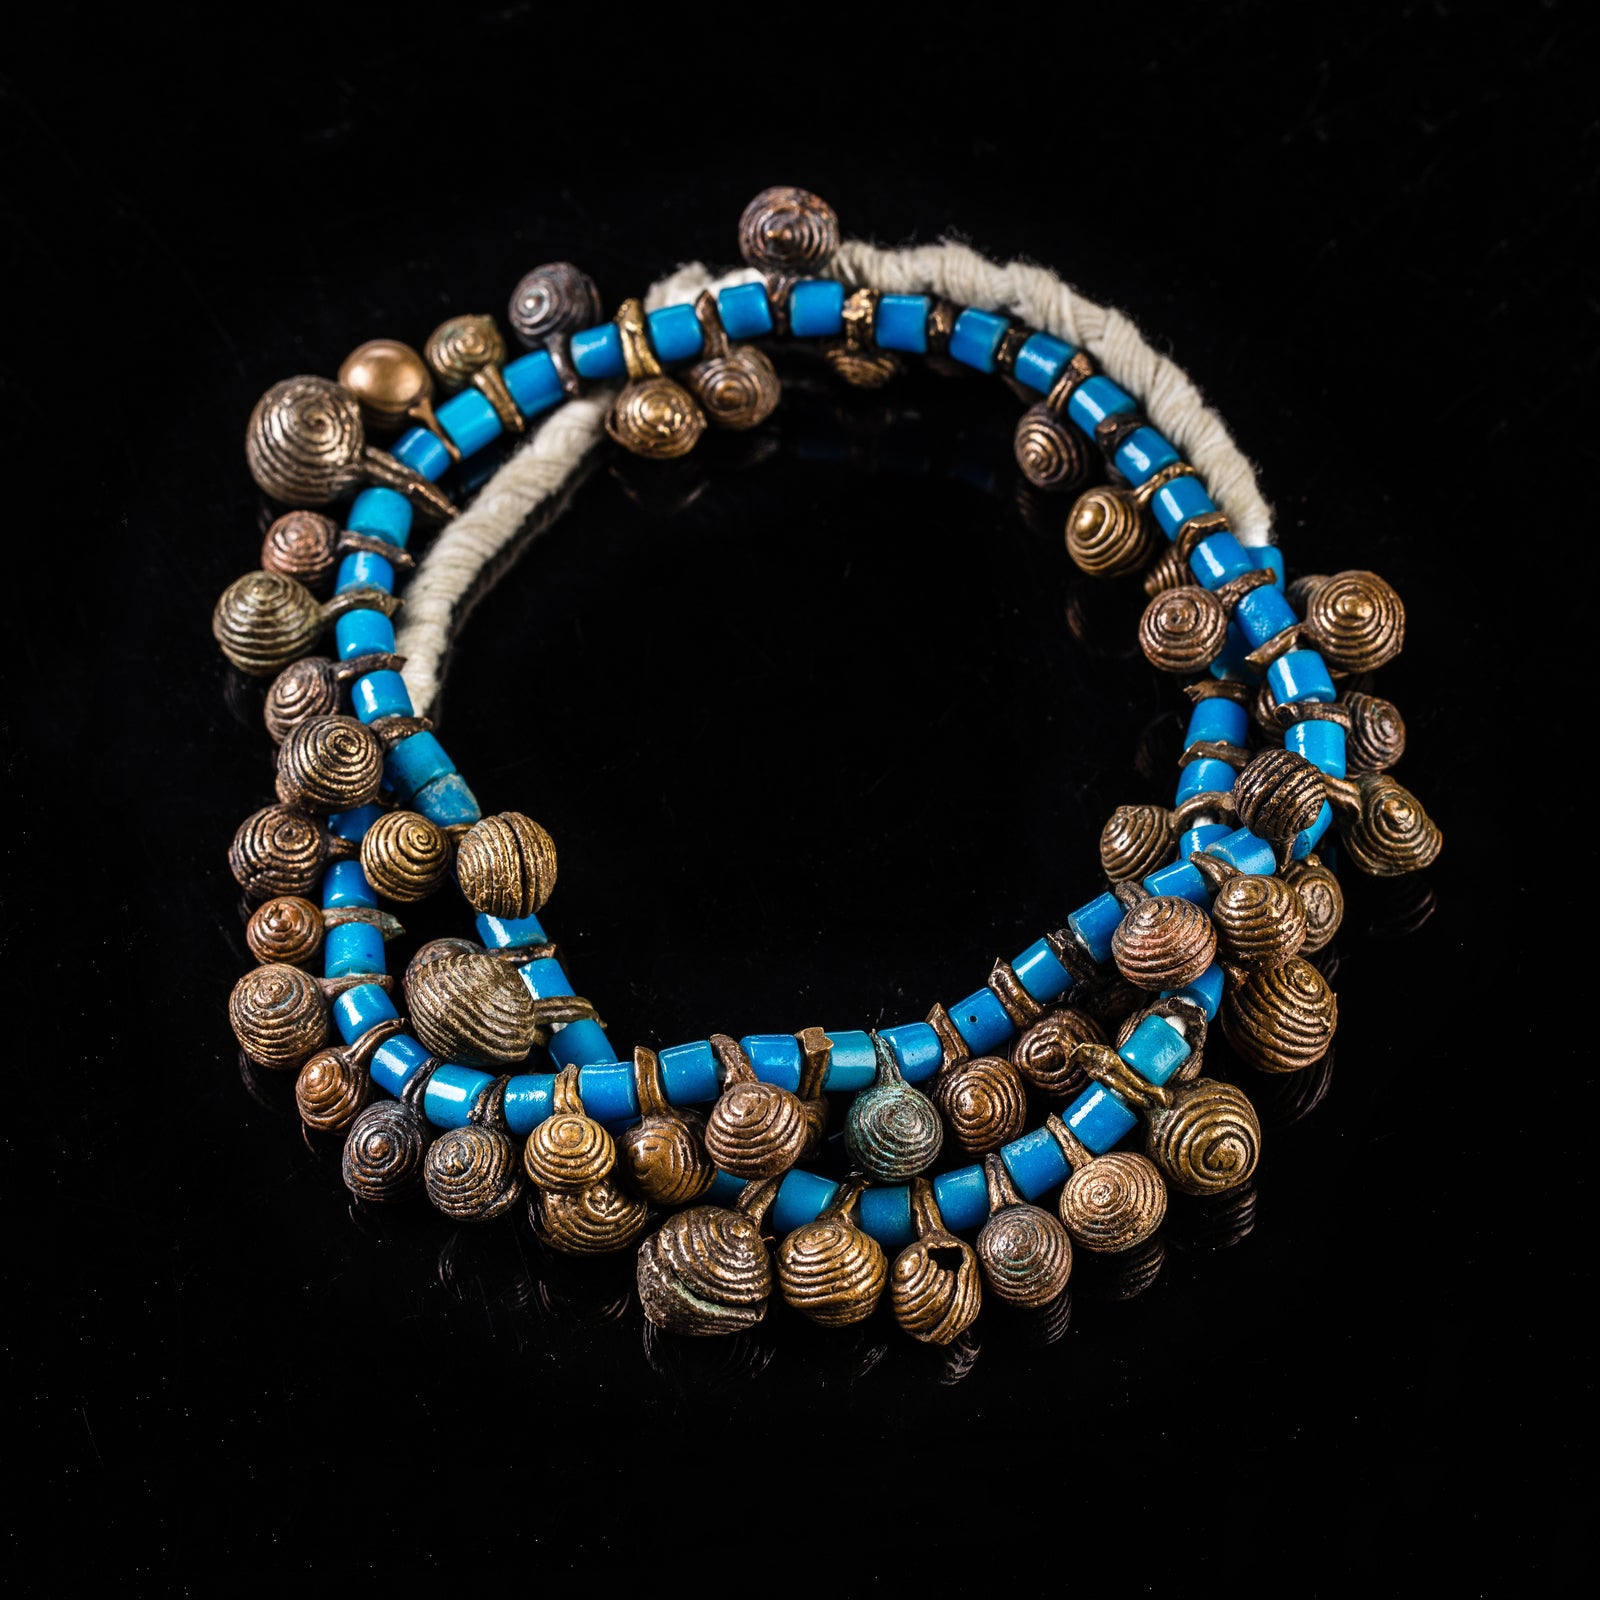 Tribal Necklaces - Handmade - Naga Art - Jewelry - Traditional - Naga Necklaces - Beaded - Collectible Necklaces - This Naga Blue Glass Trade Beads Necklace, Bronze Beaded Jewelry, is a timeless accessory. Collectible Naga Jewelry featuring old bronze beads and blue trade beads is an eye-catching piece sure to last. Add a touch of class to any outfit with this traditional yet modern necklace.  Length: 13